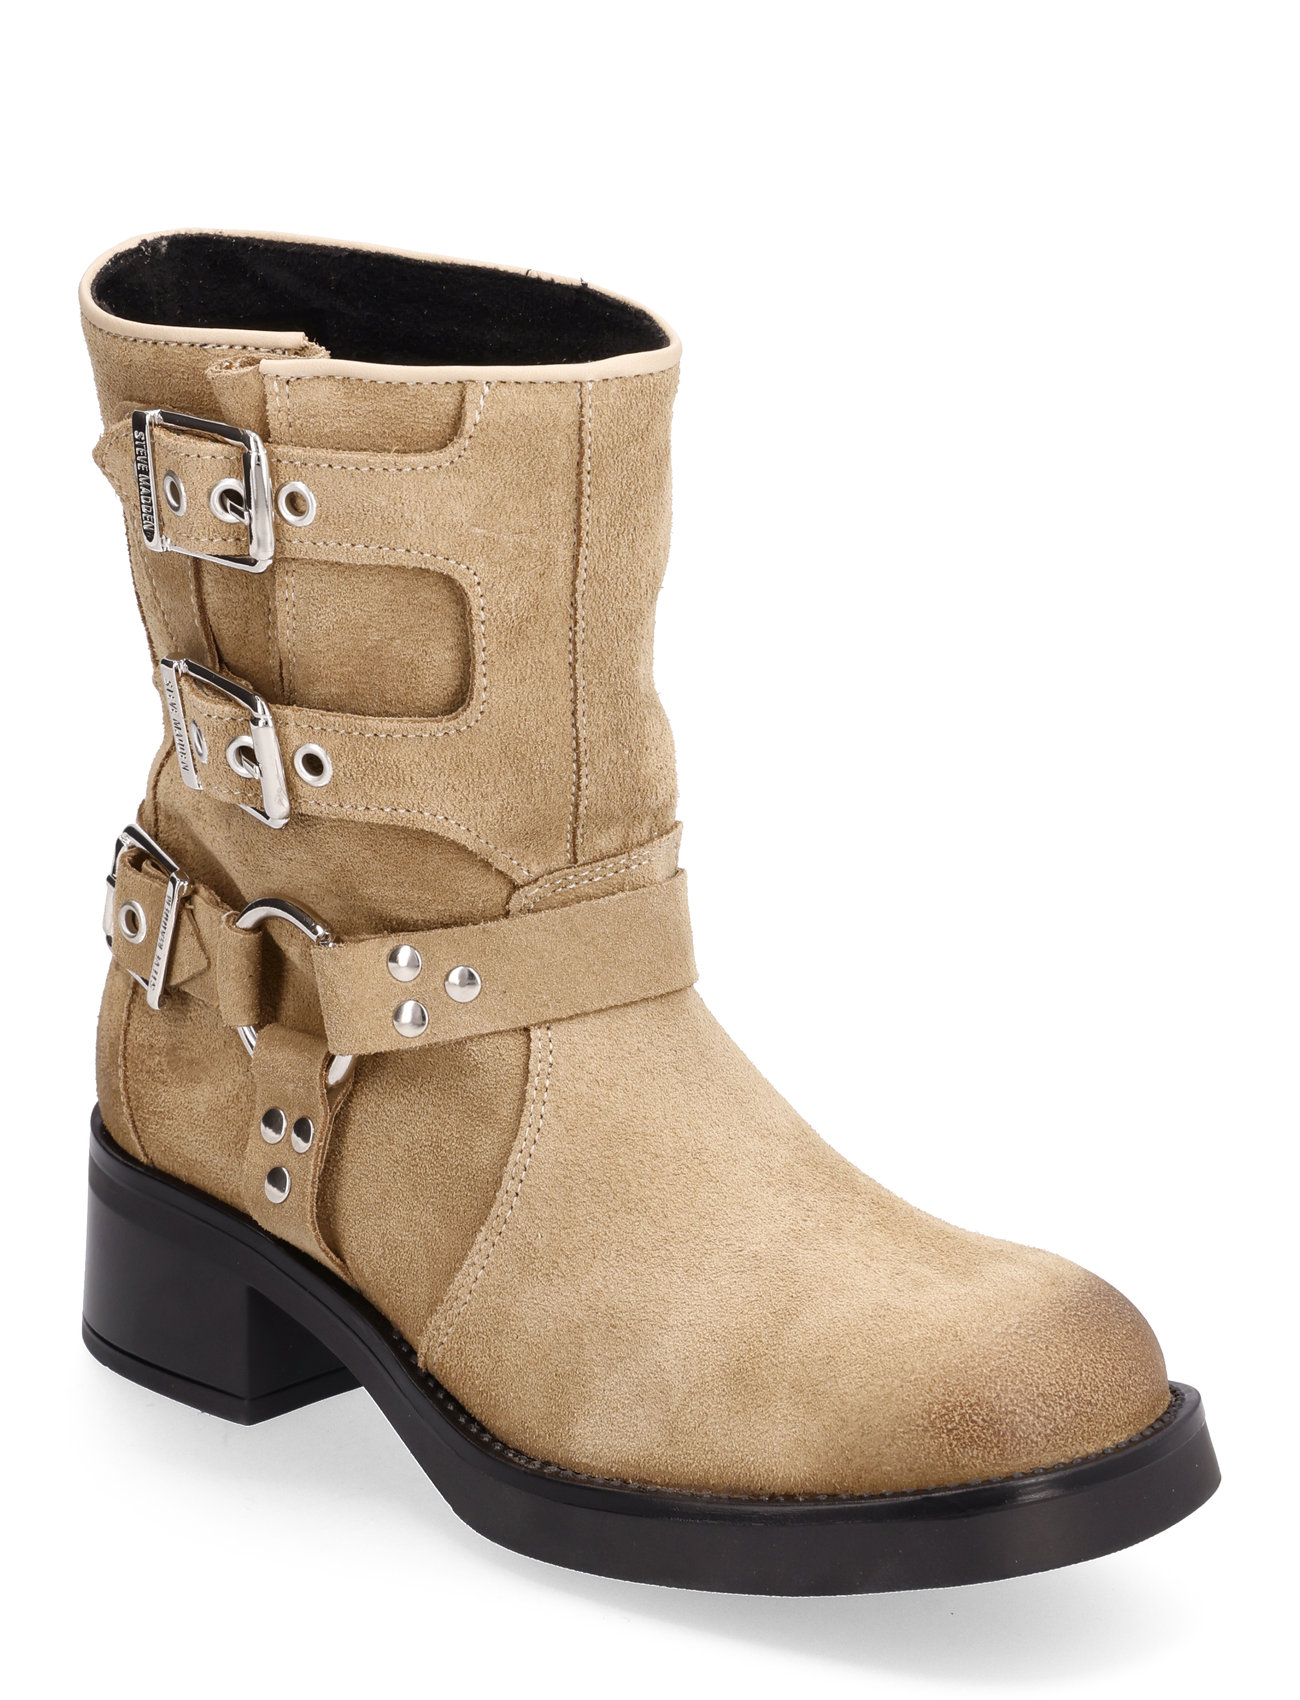 Becase Boot Shoes Boots Ankle Boots Ankle Boots With Heel Beige Steve Madden